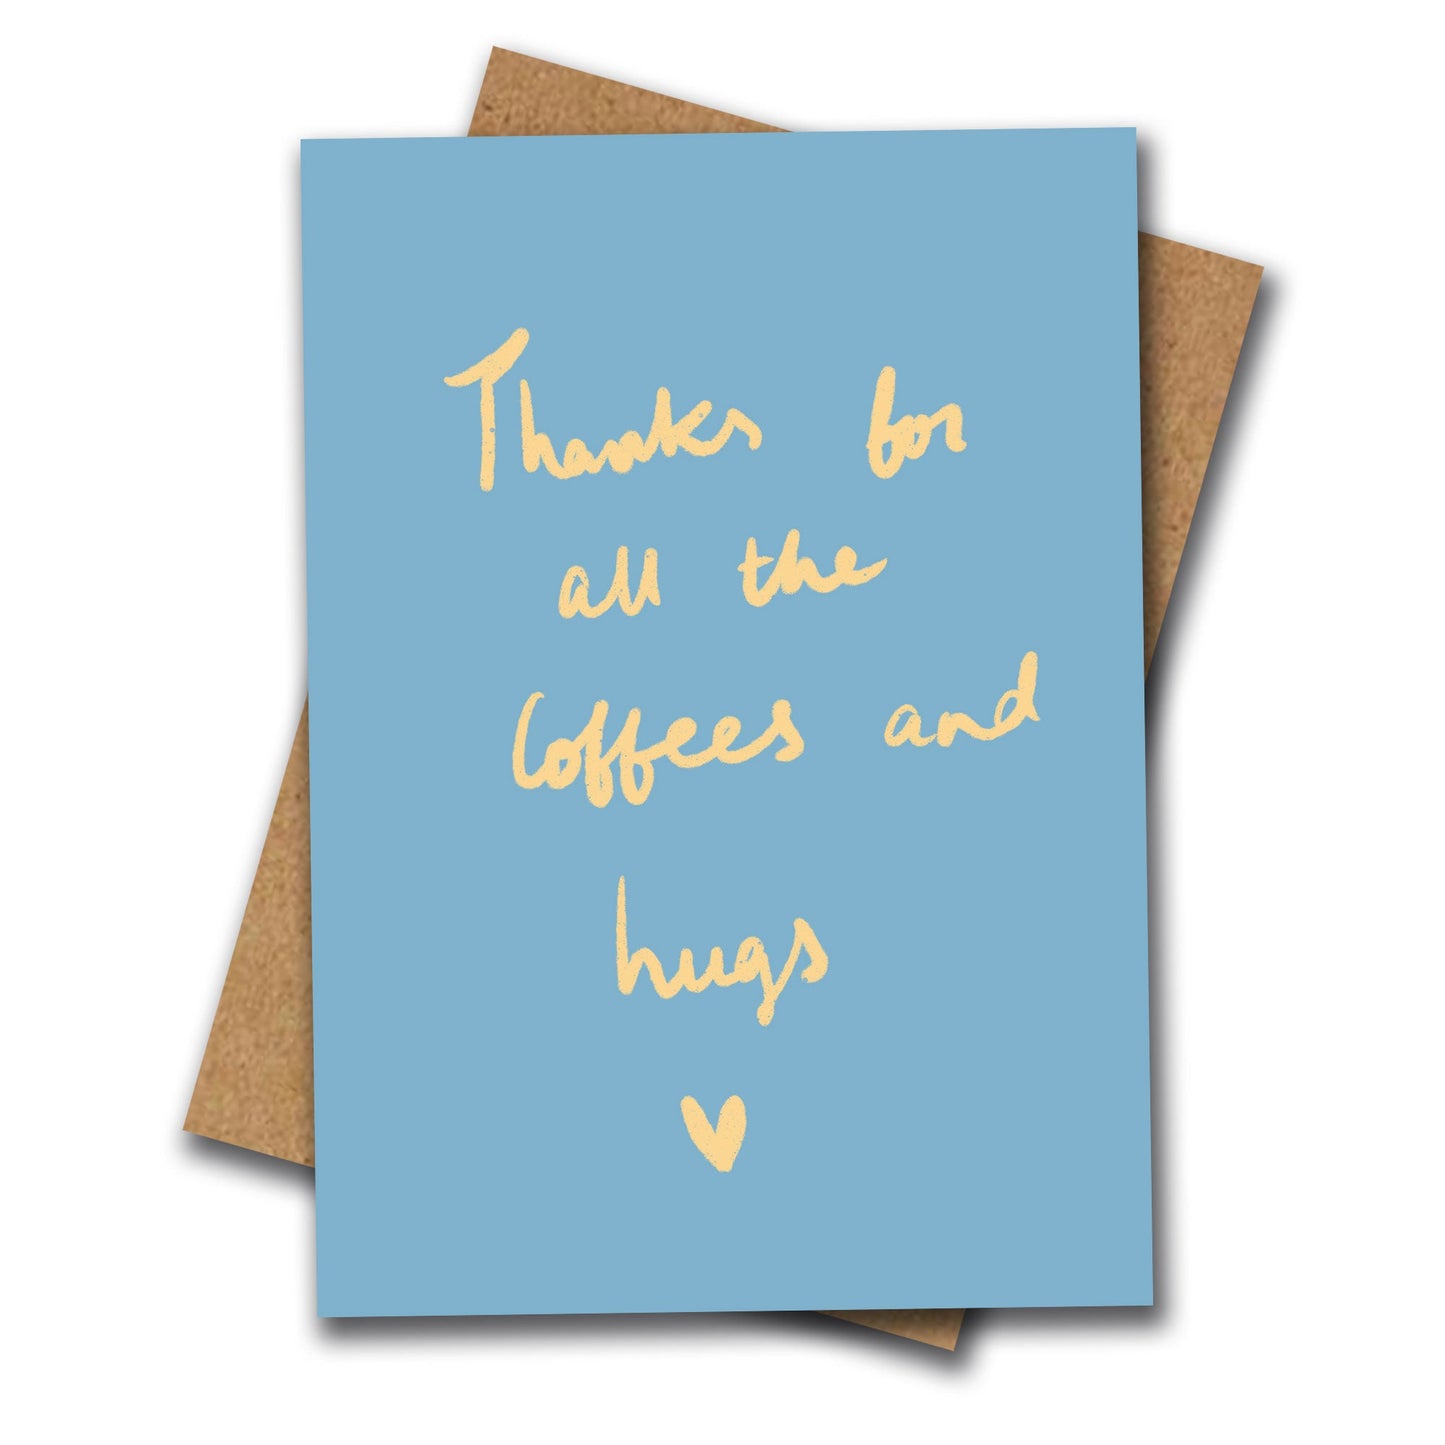 Thanks for the coffees and hugs card